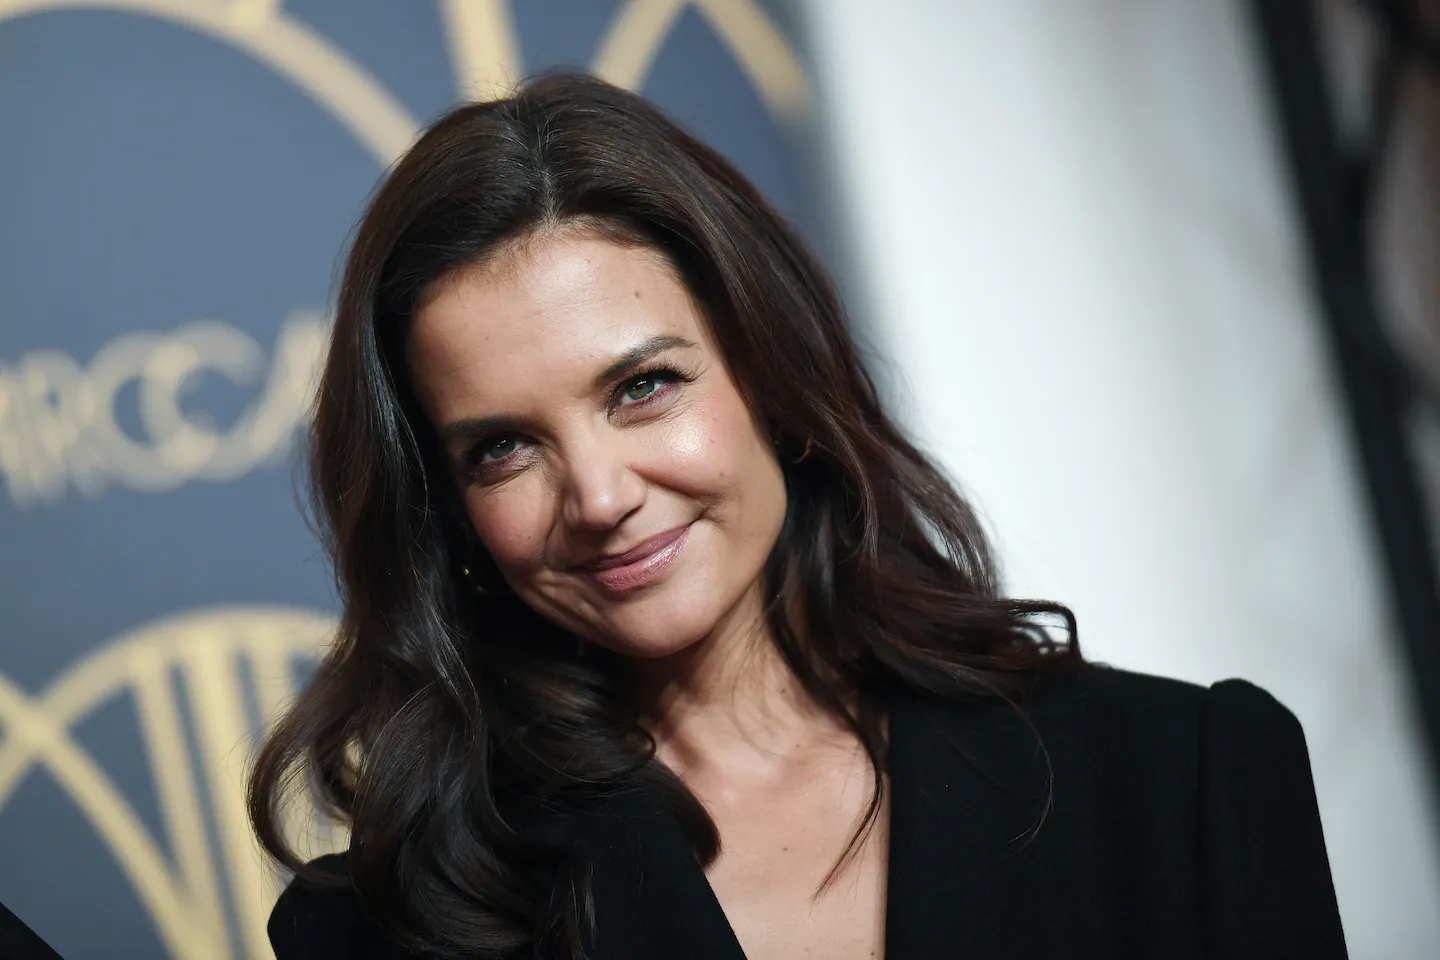 Suri Cruises Latest Outing Shows Her Lookalike Mother Katie Holmes Is Her Style Inspiration 